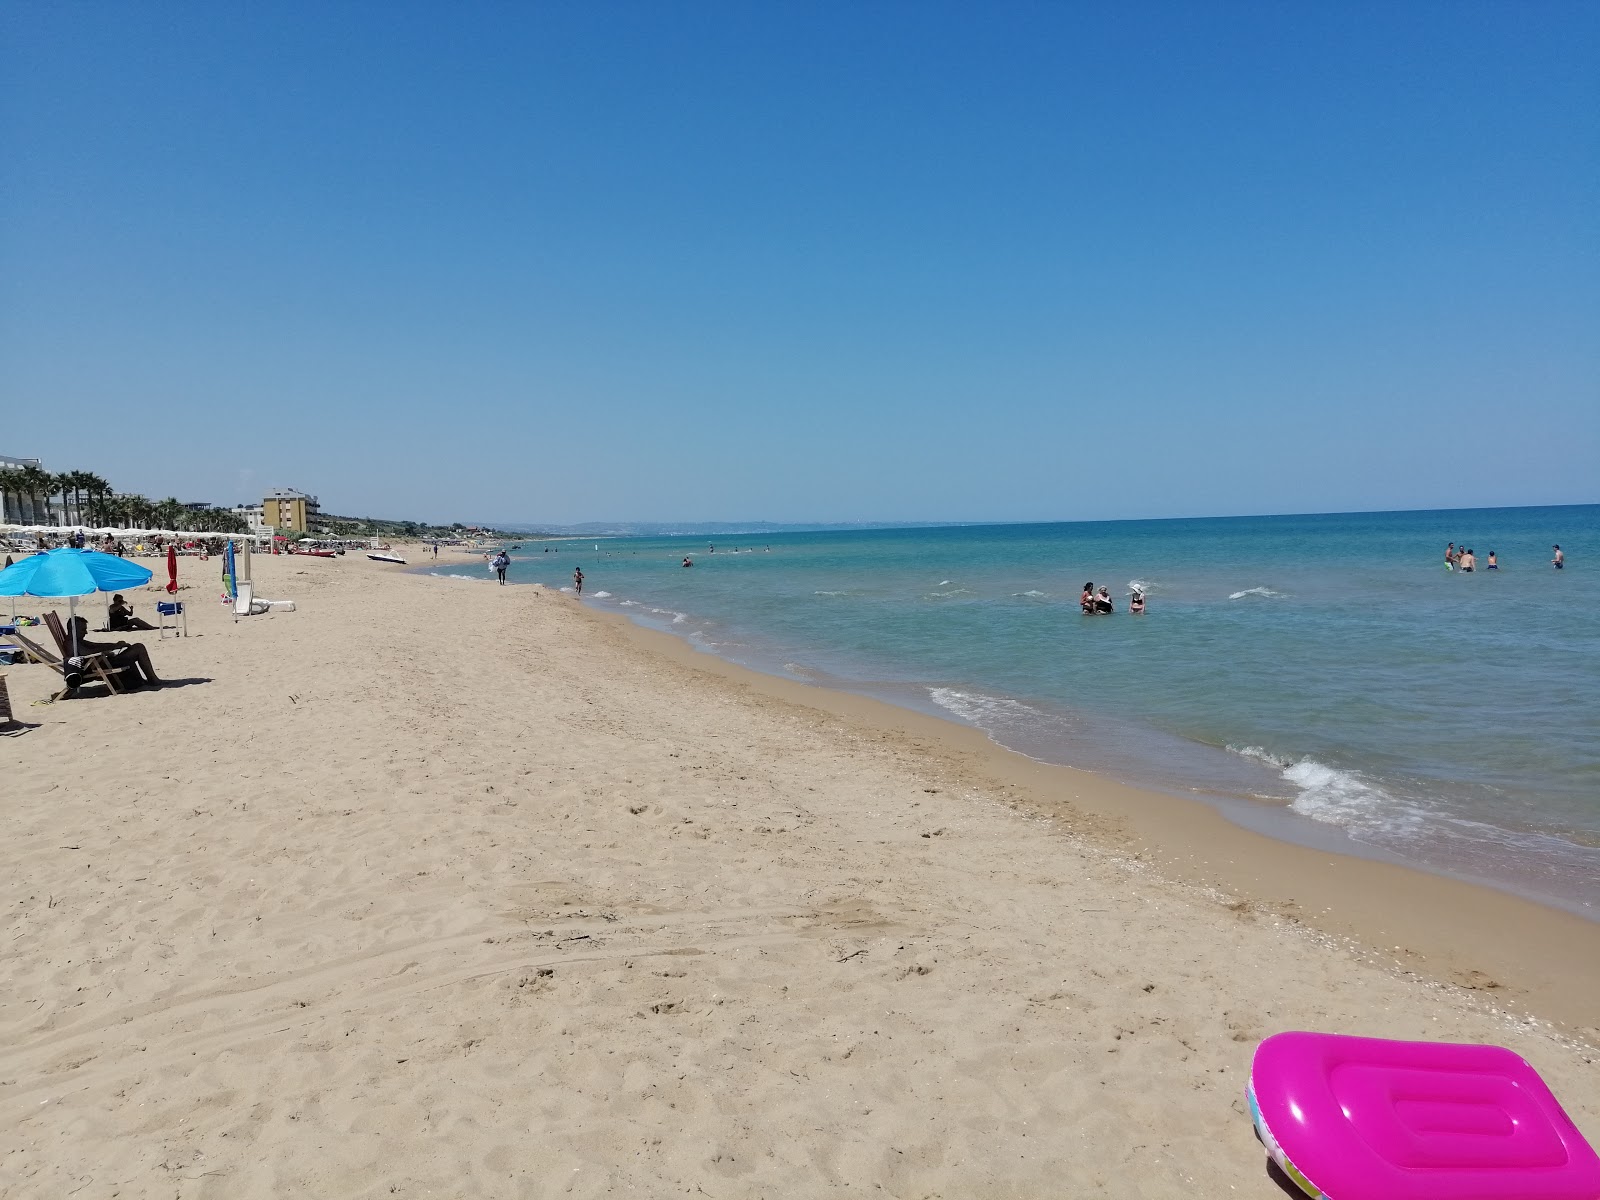 Foto af Spiaggia di Campomarino med store bugter